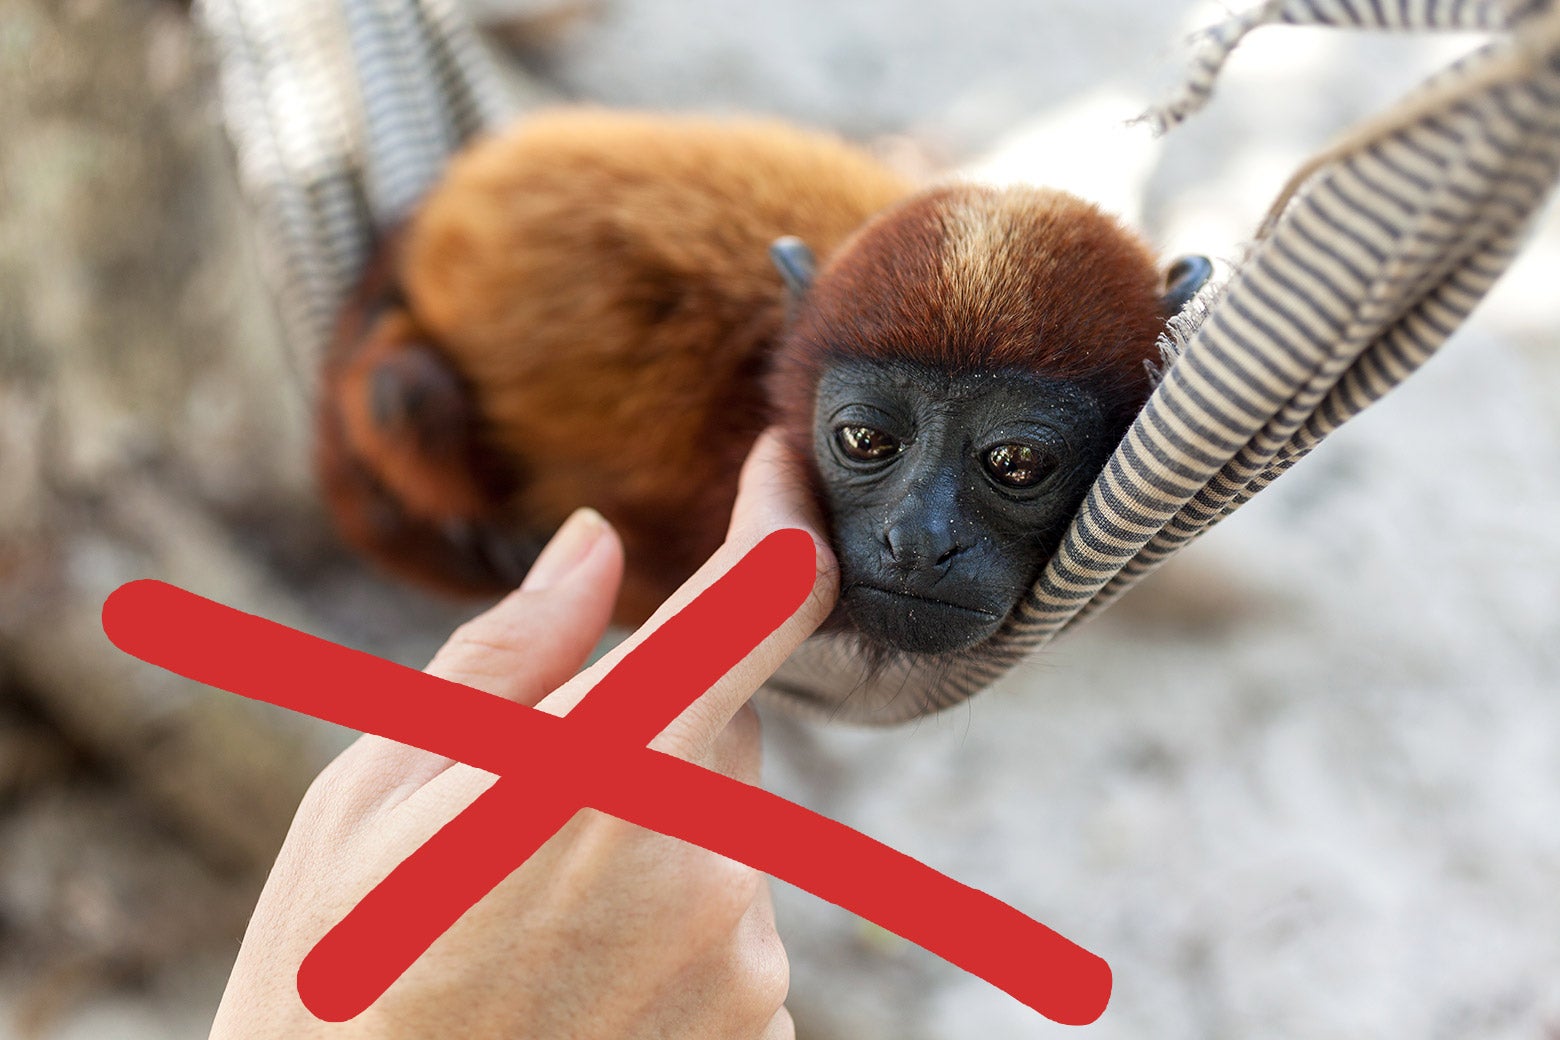 An adorable monkey lies on a hammock, while a human hand reaches out to pet it. Over the hand is a forbidding red X.